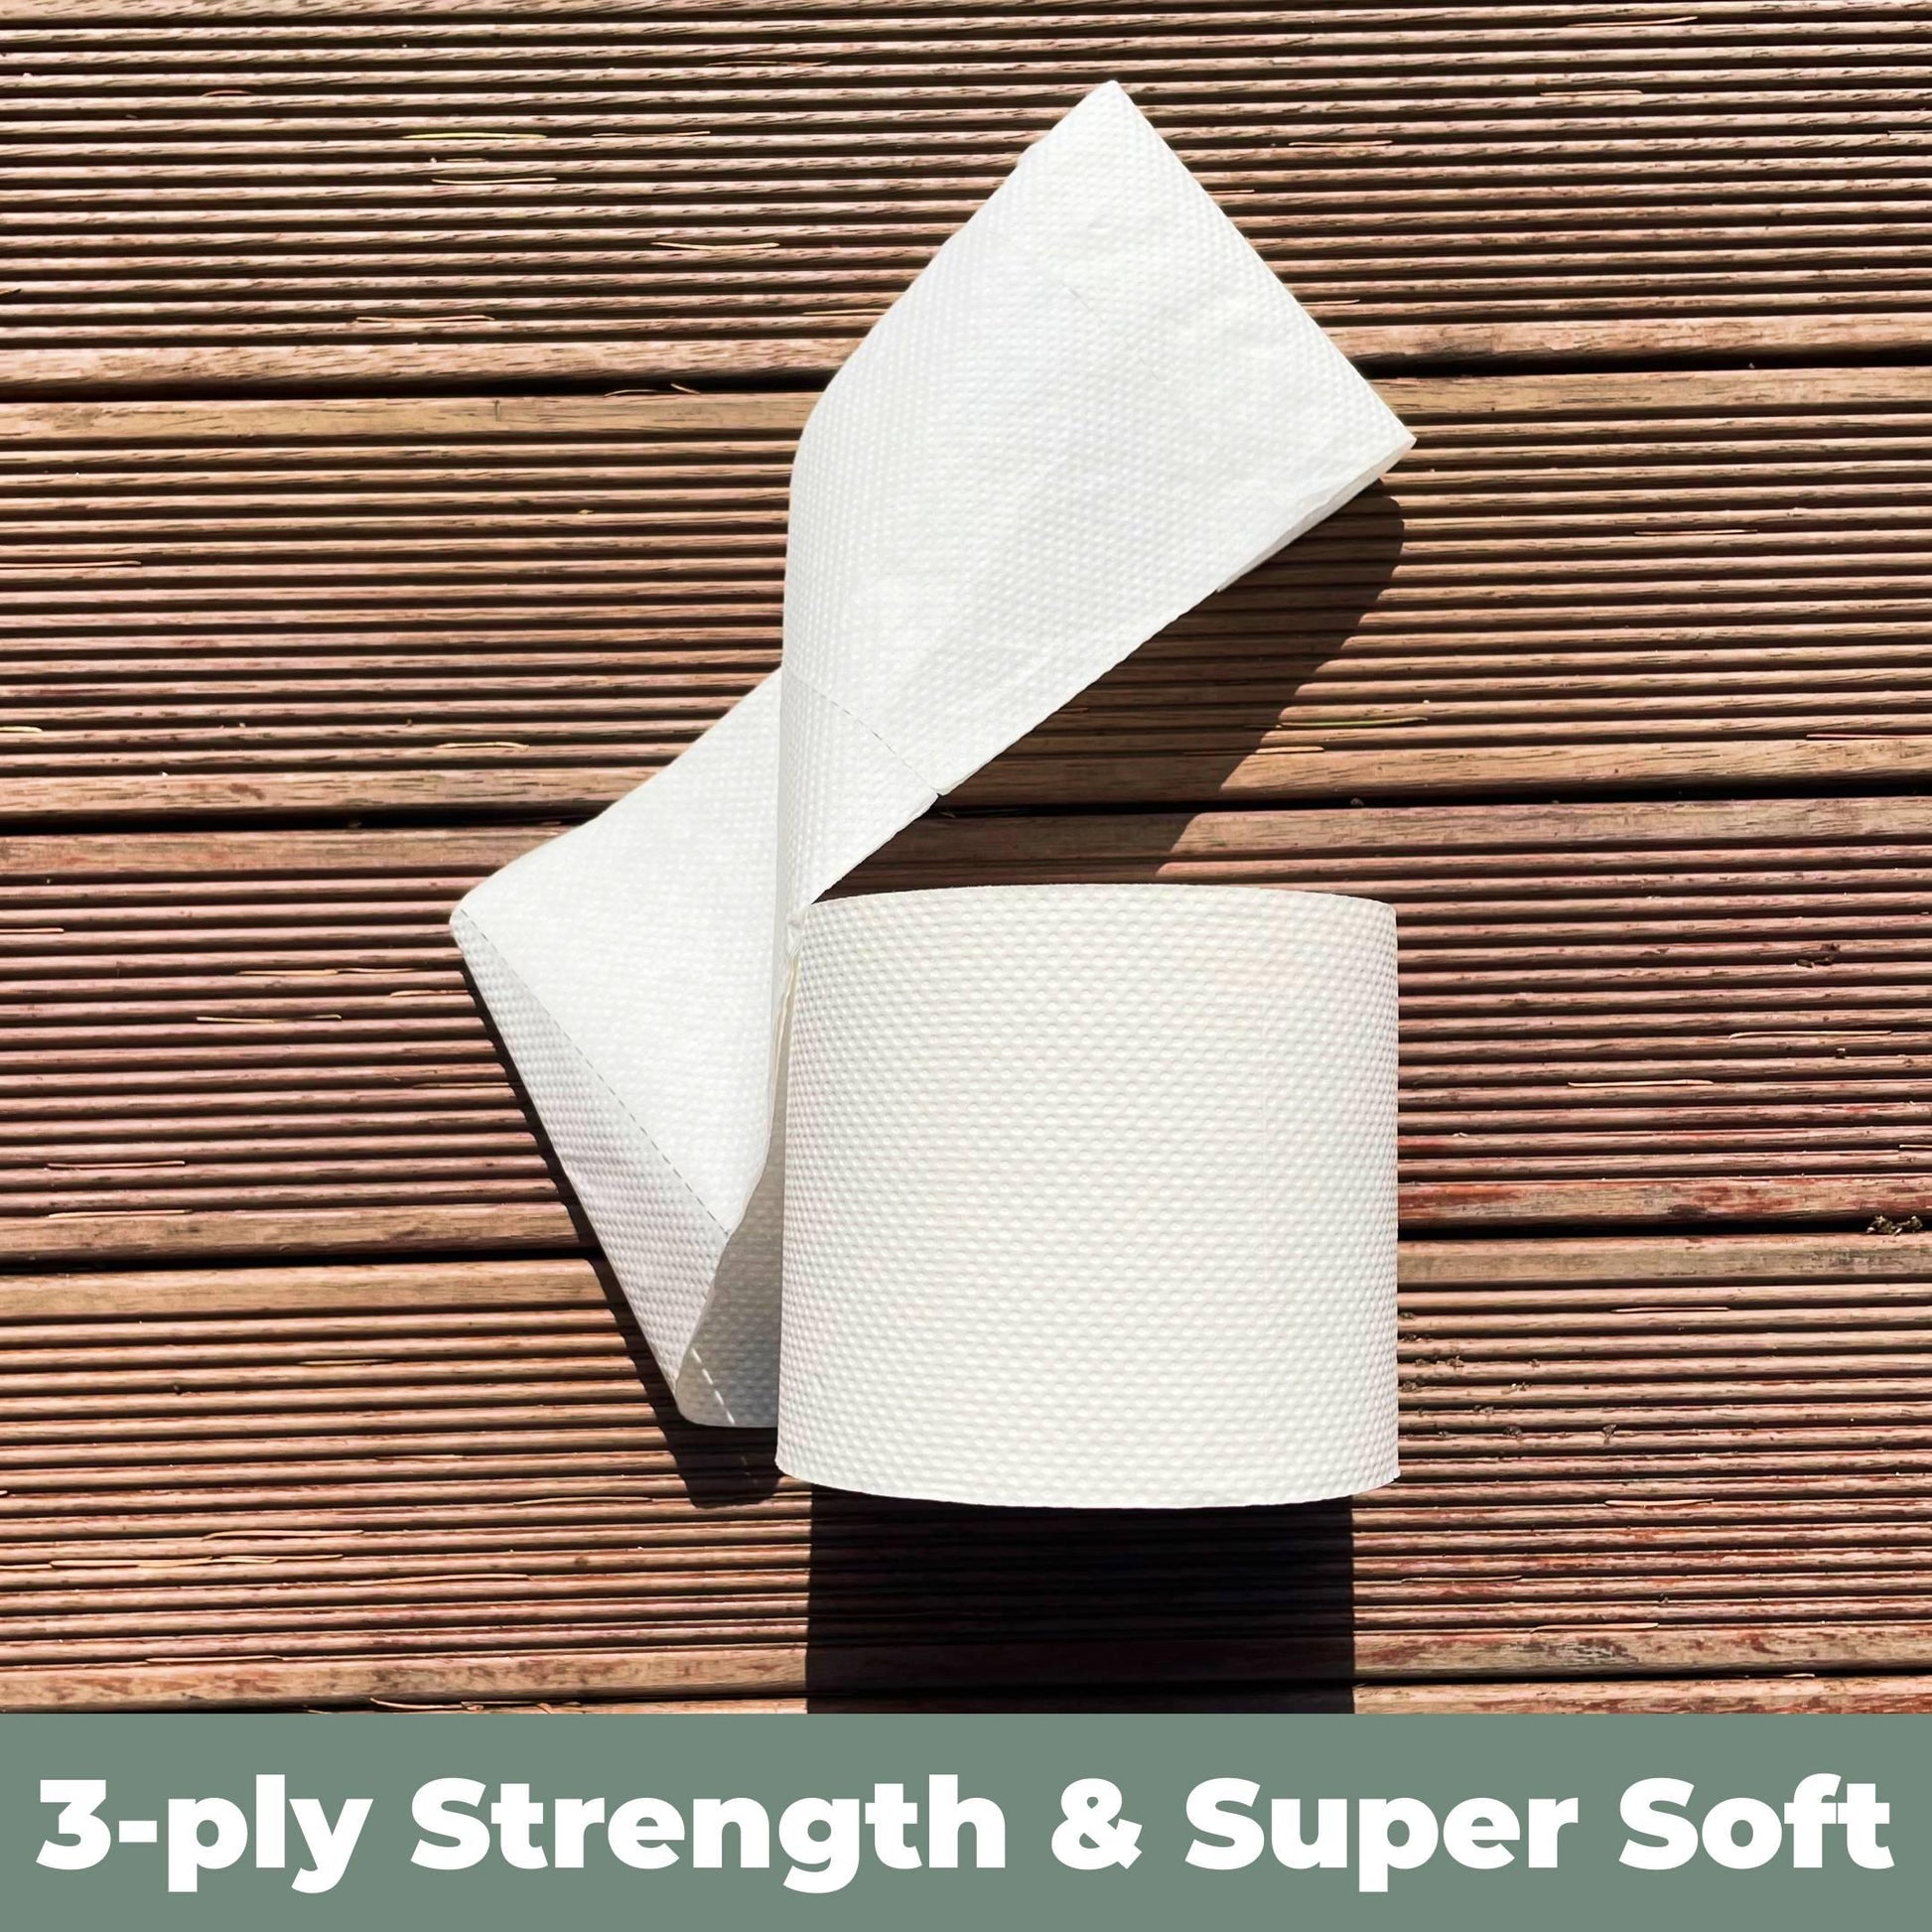 Bamboo Toilet Paper - 48 Rolls - £25.00 - Plus Free Delivery